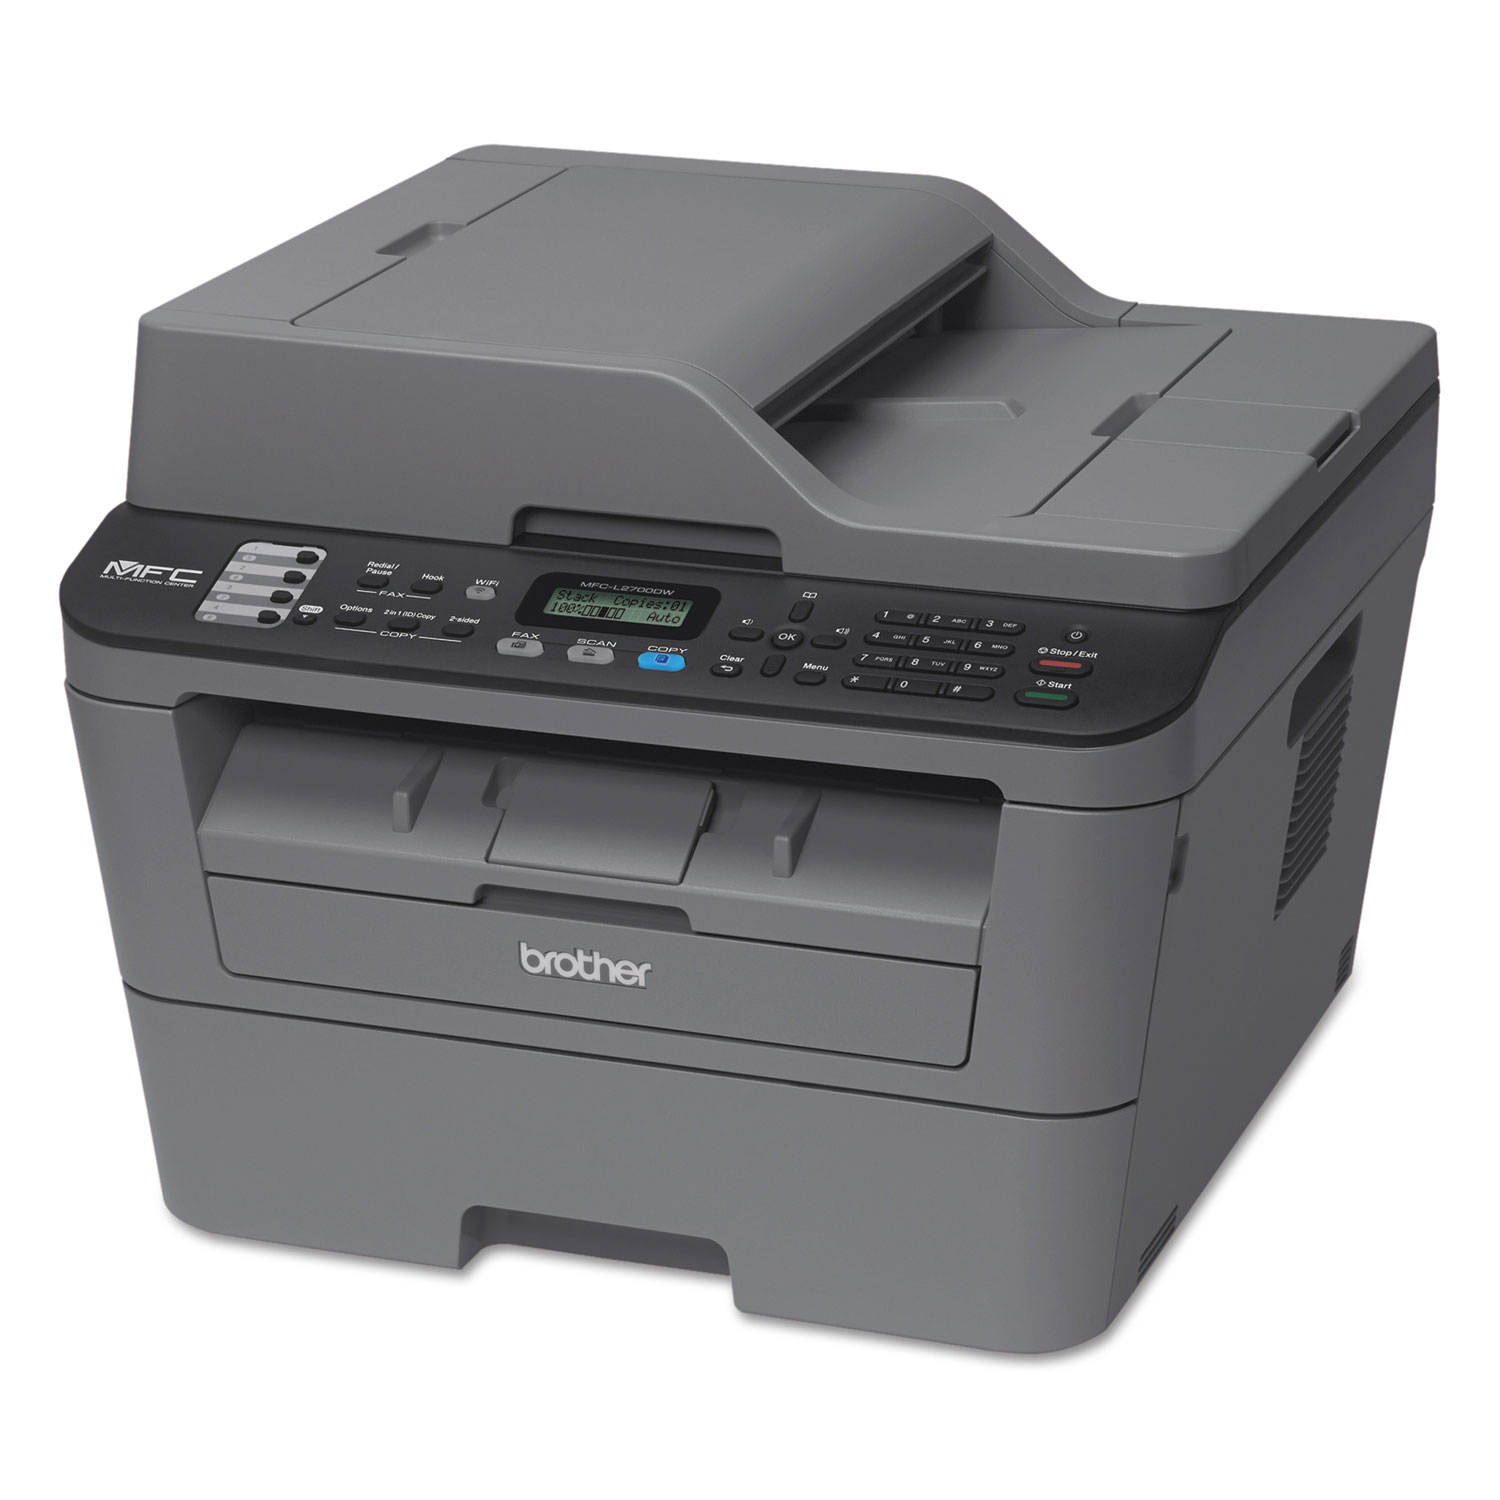 MFC-L2700DW Compact Wireless Laser All-in-One, Copy/Fax/Print/Scan